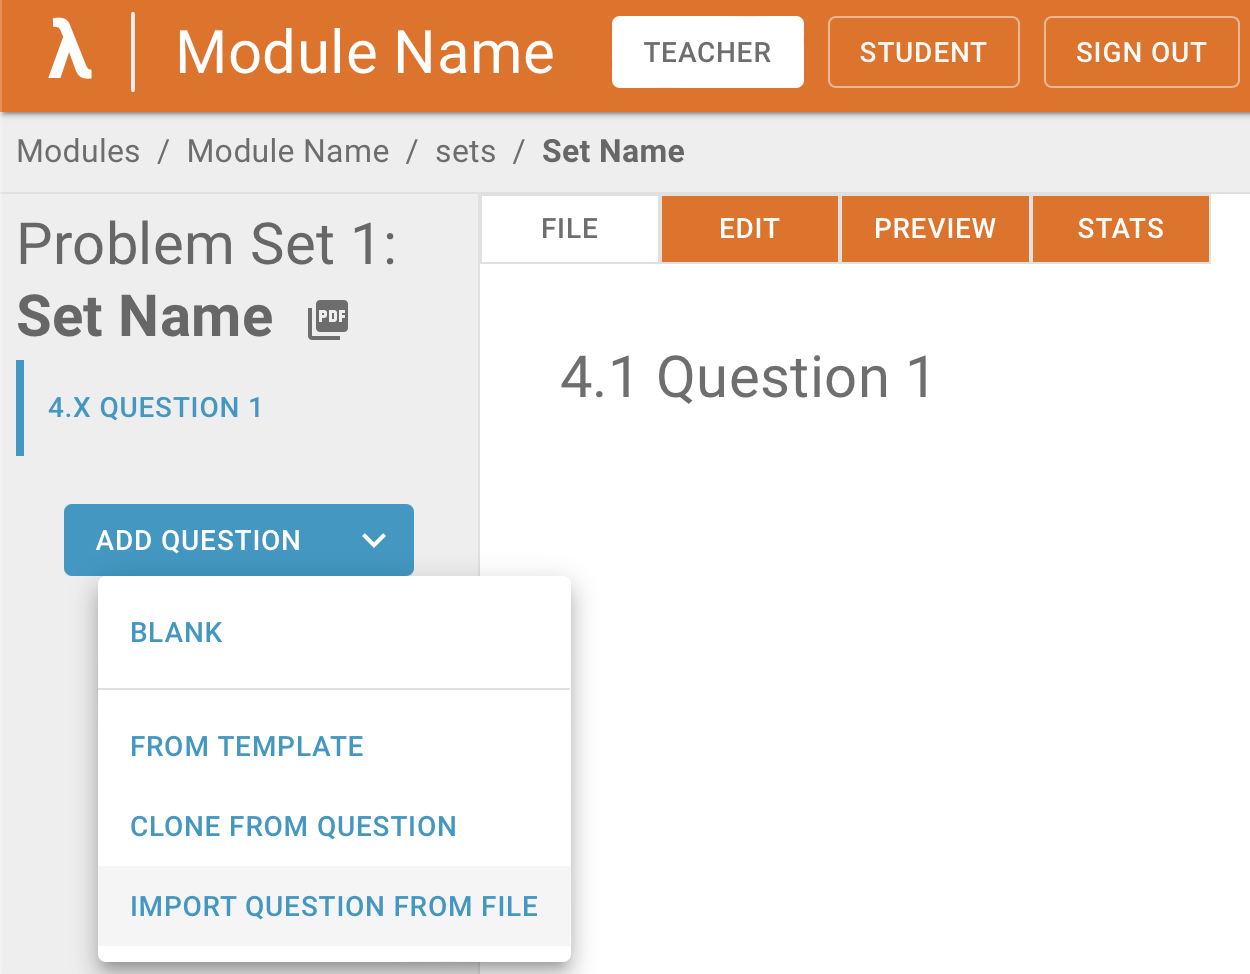 Importing Question from file in Teacher Mode